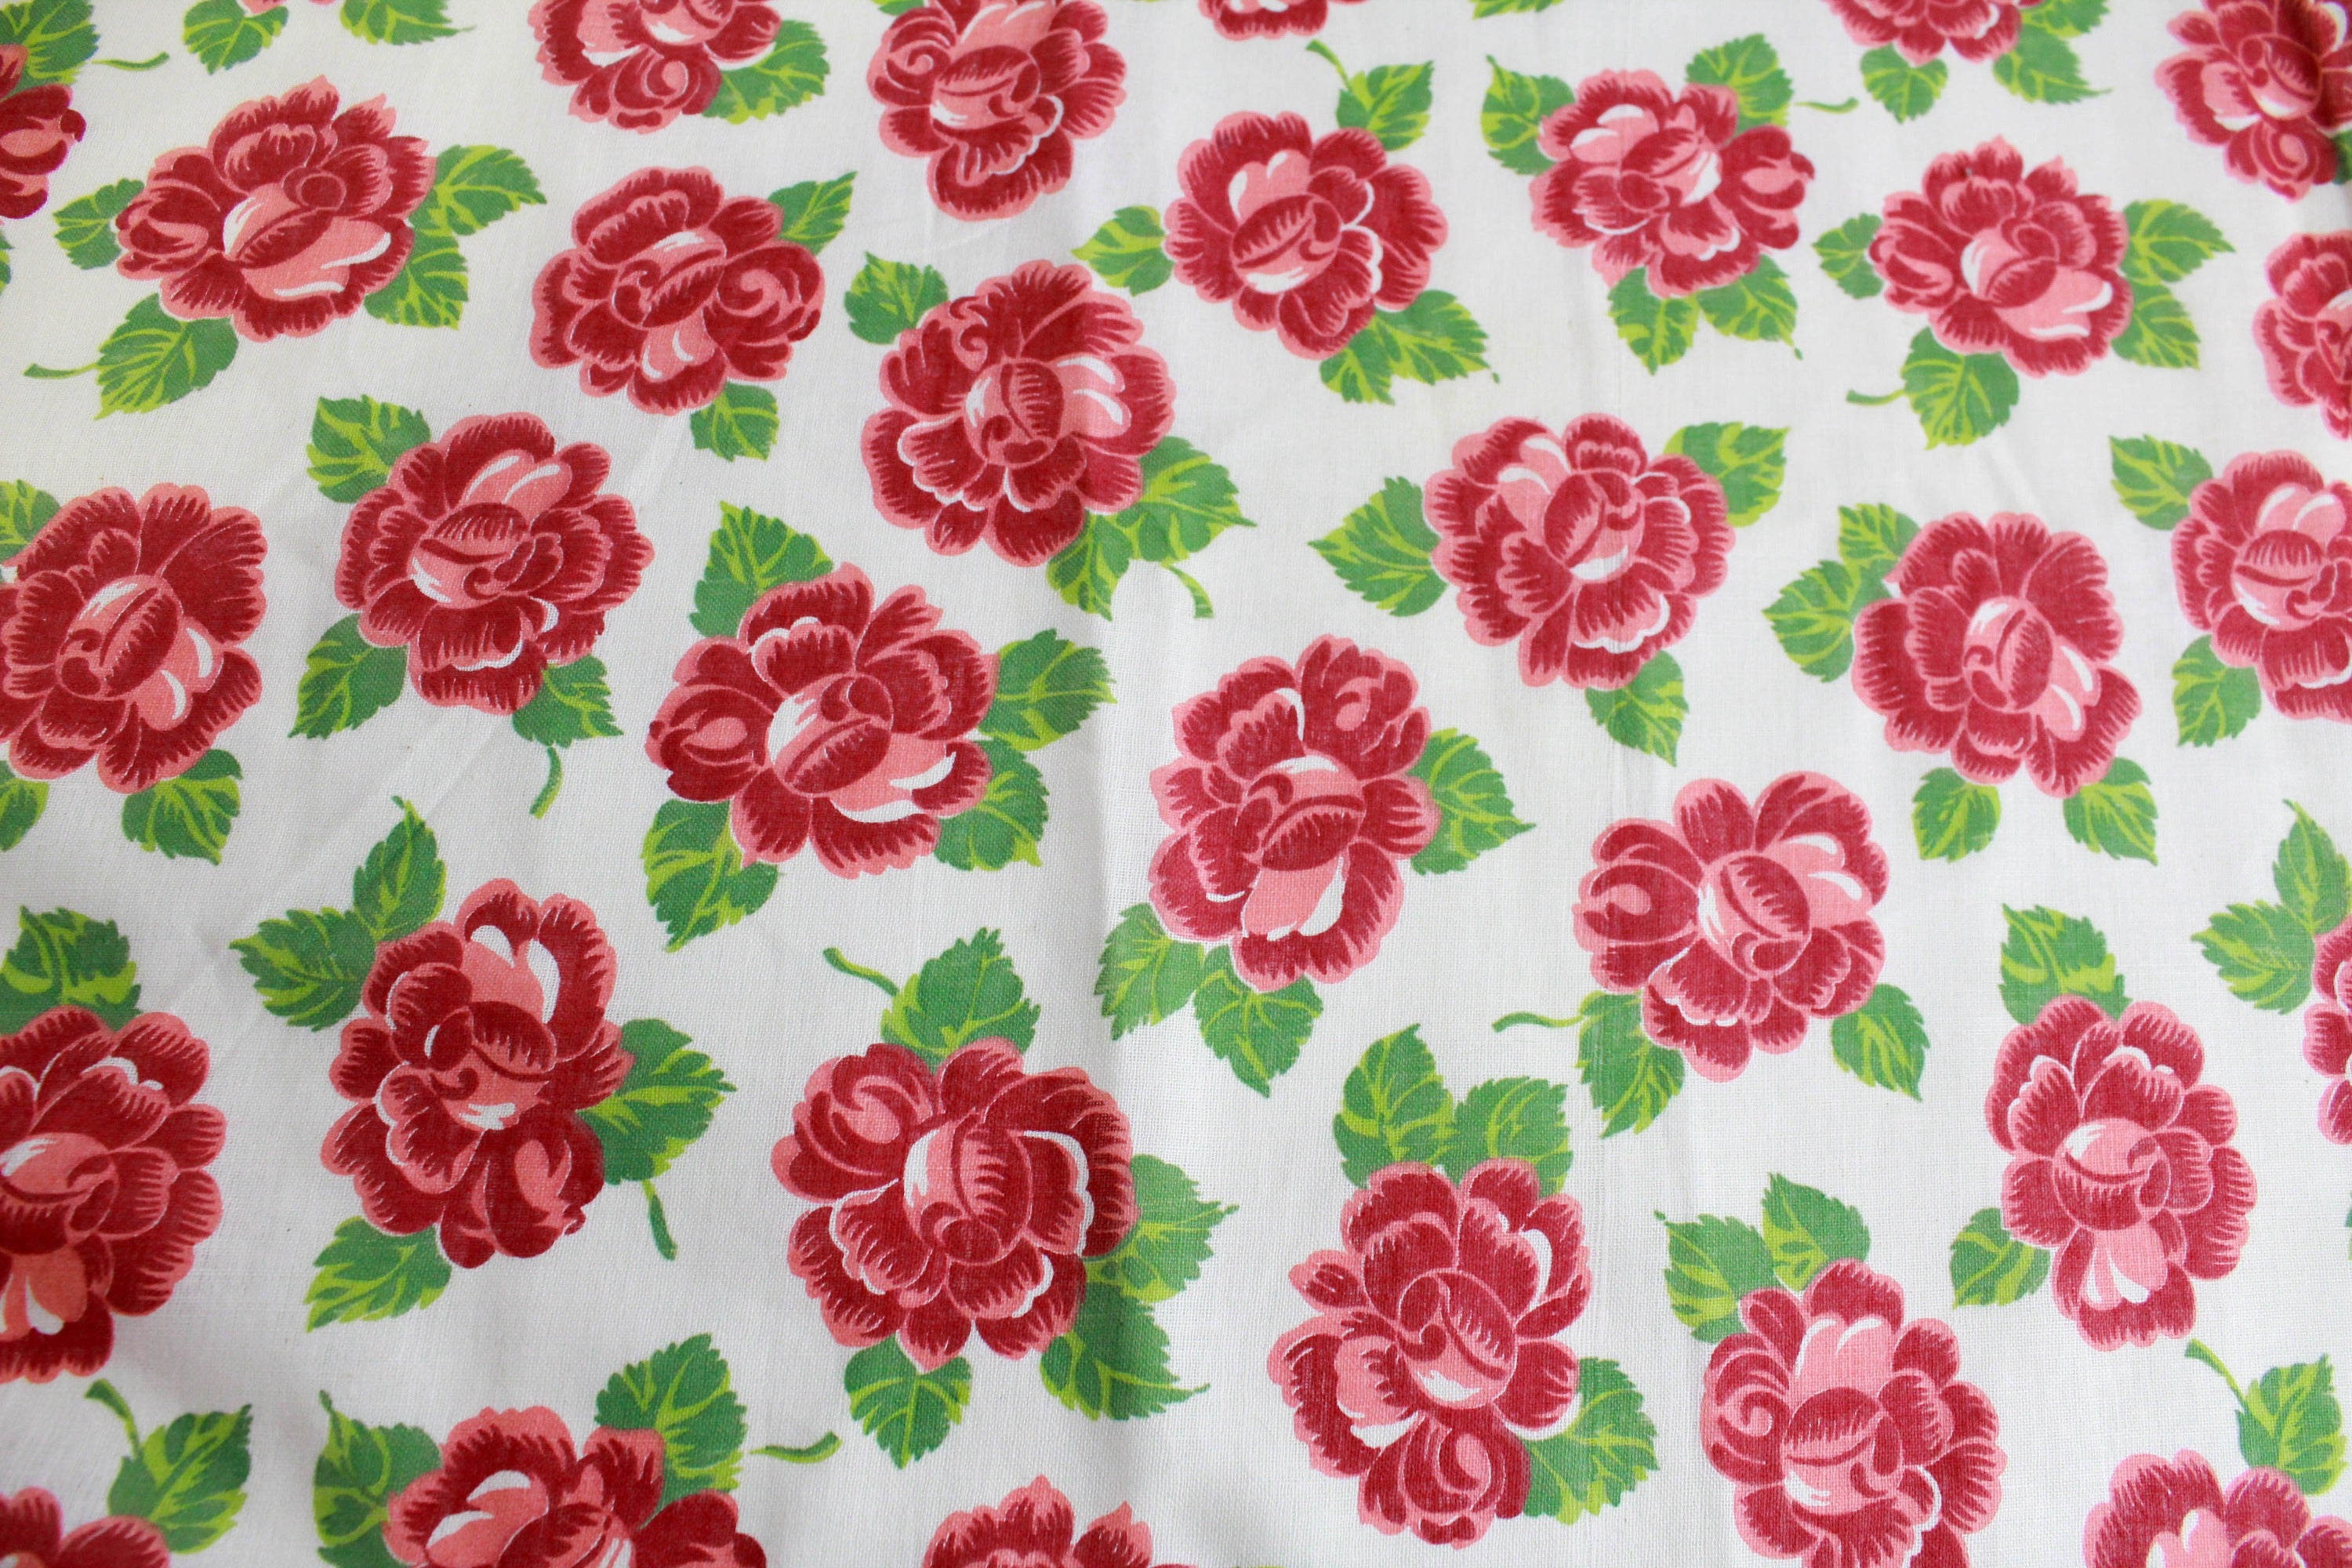 1940s Poppy Print Cotton Fabric, 5 + Yards, Floral Print Sewing Fabric –  Ian Drummond Vintage